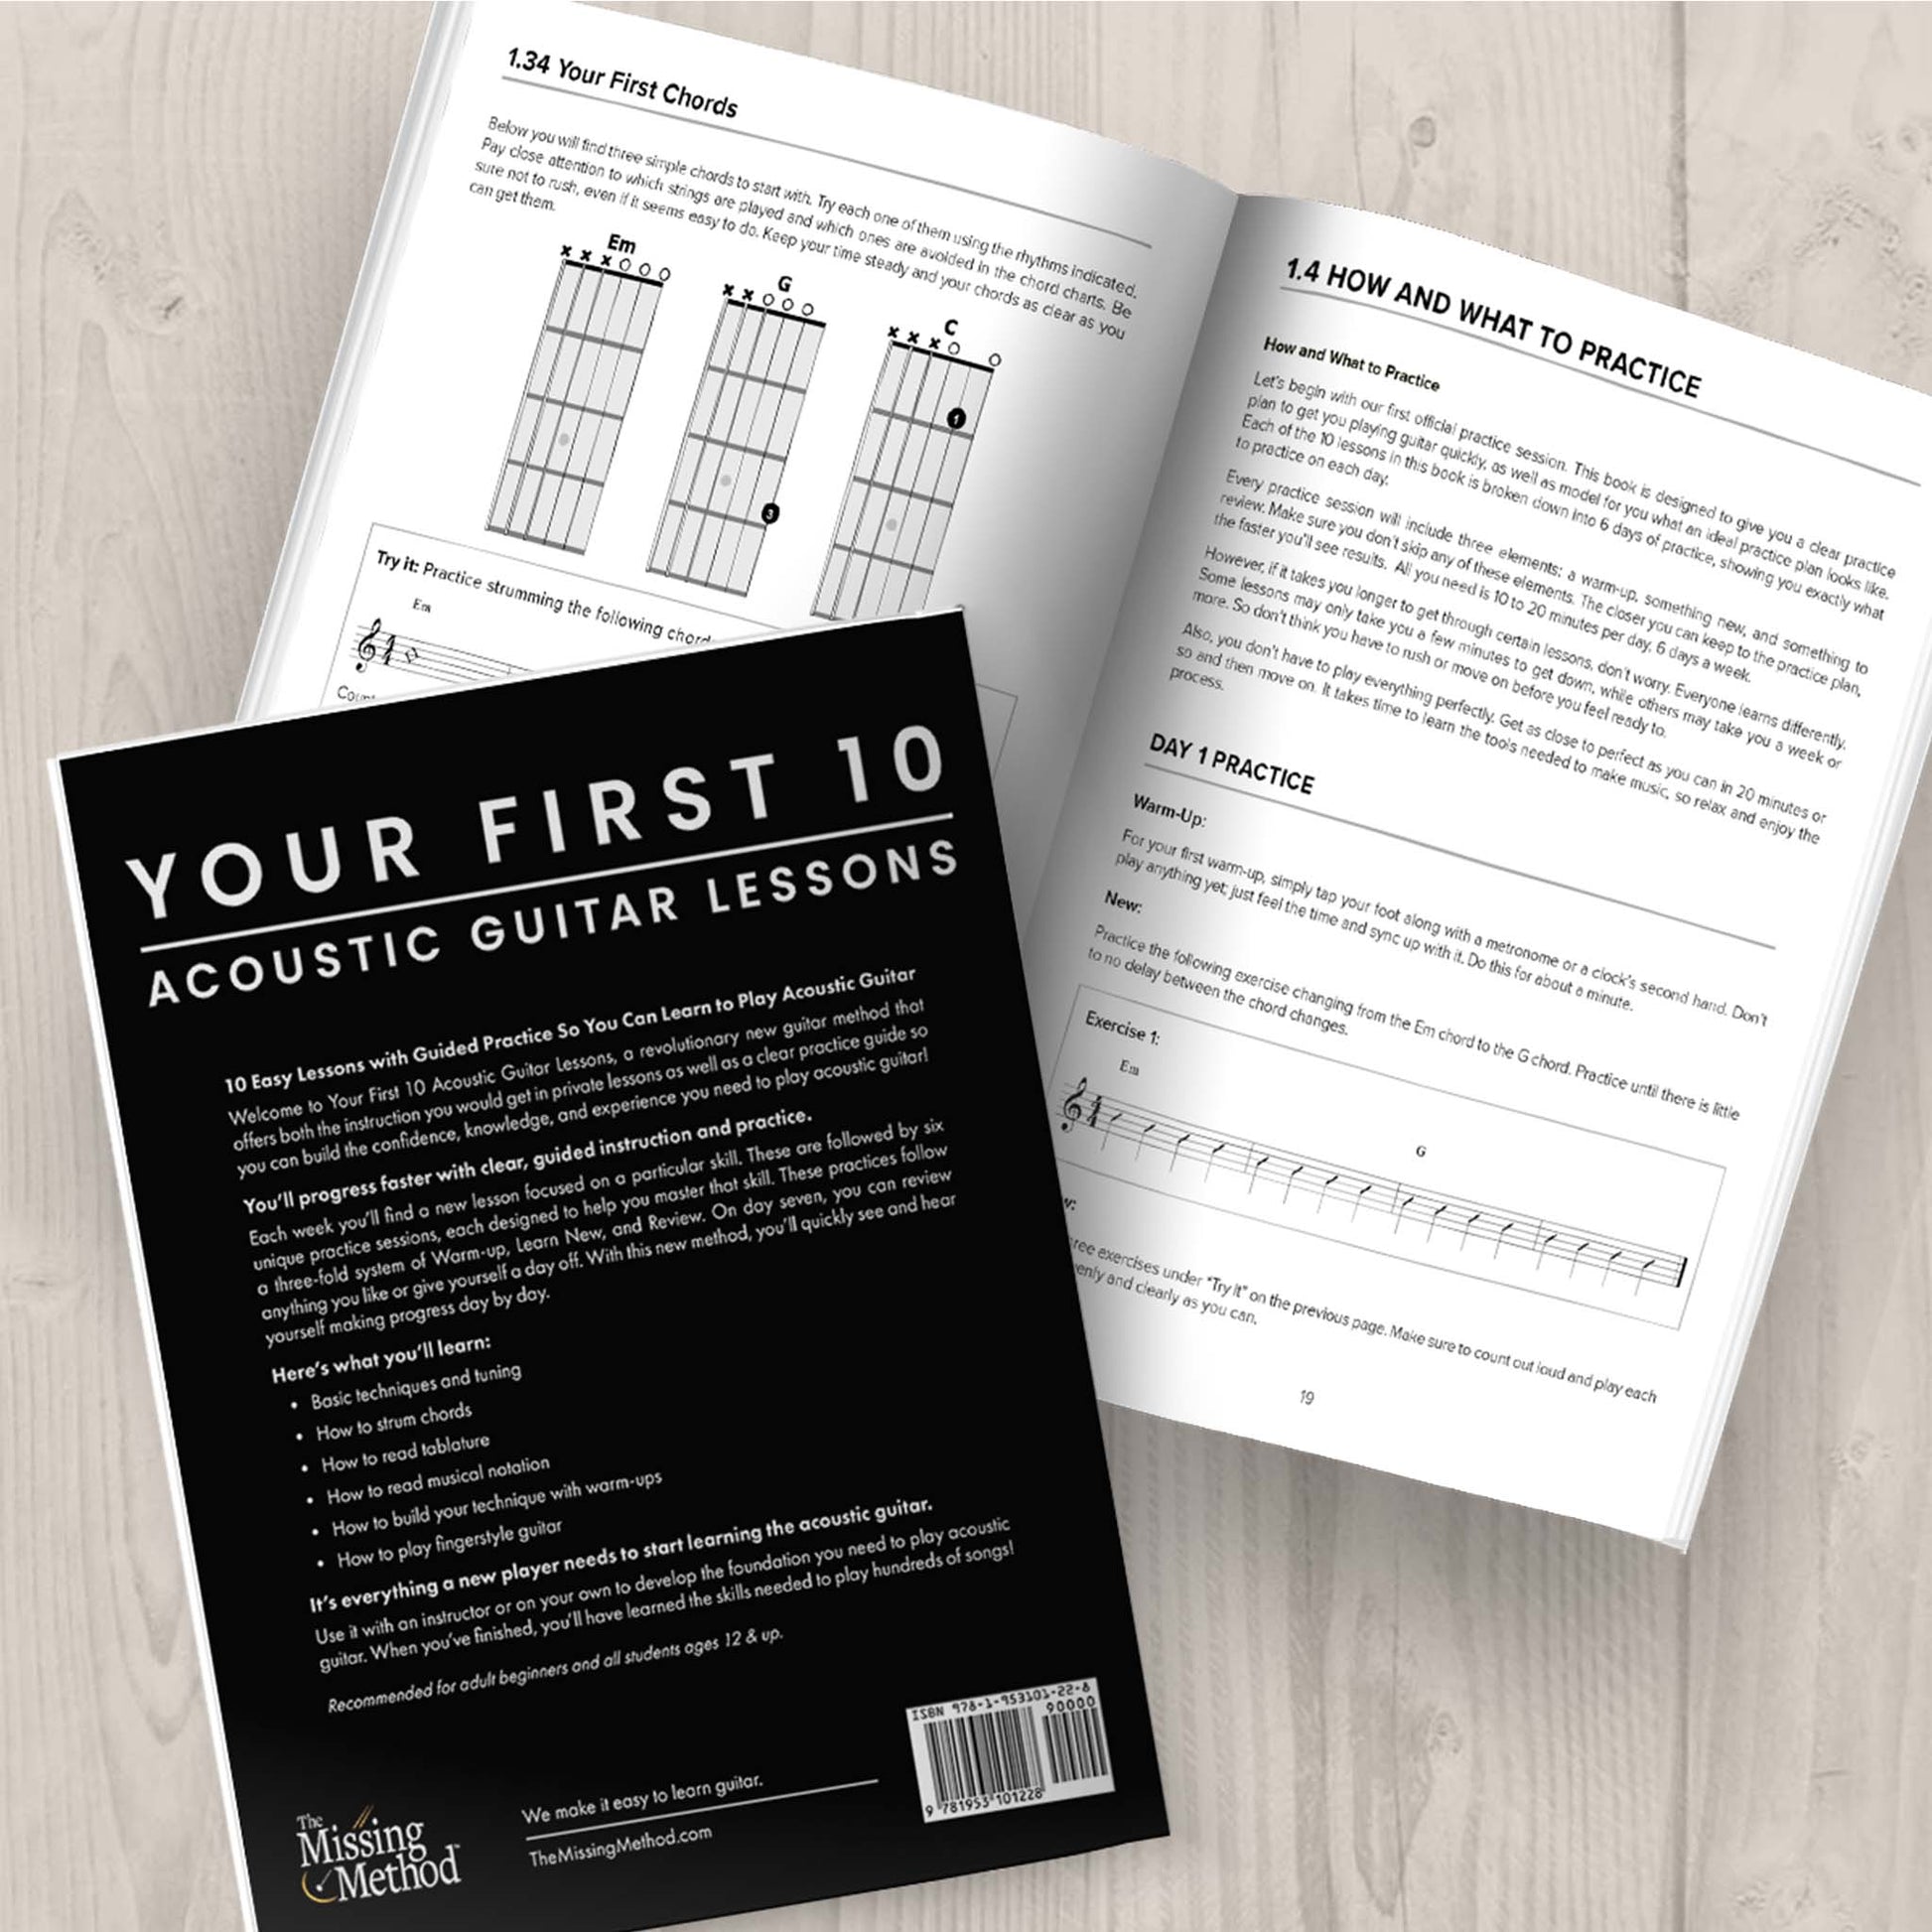 Your First 10 Acoustic Guitar Lessons from The Missing Method for Guitar. Image of two copies of the book on a table, one open to display pages in the first lesson, and the second closed, displaying the back cover.